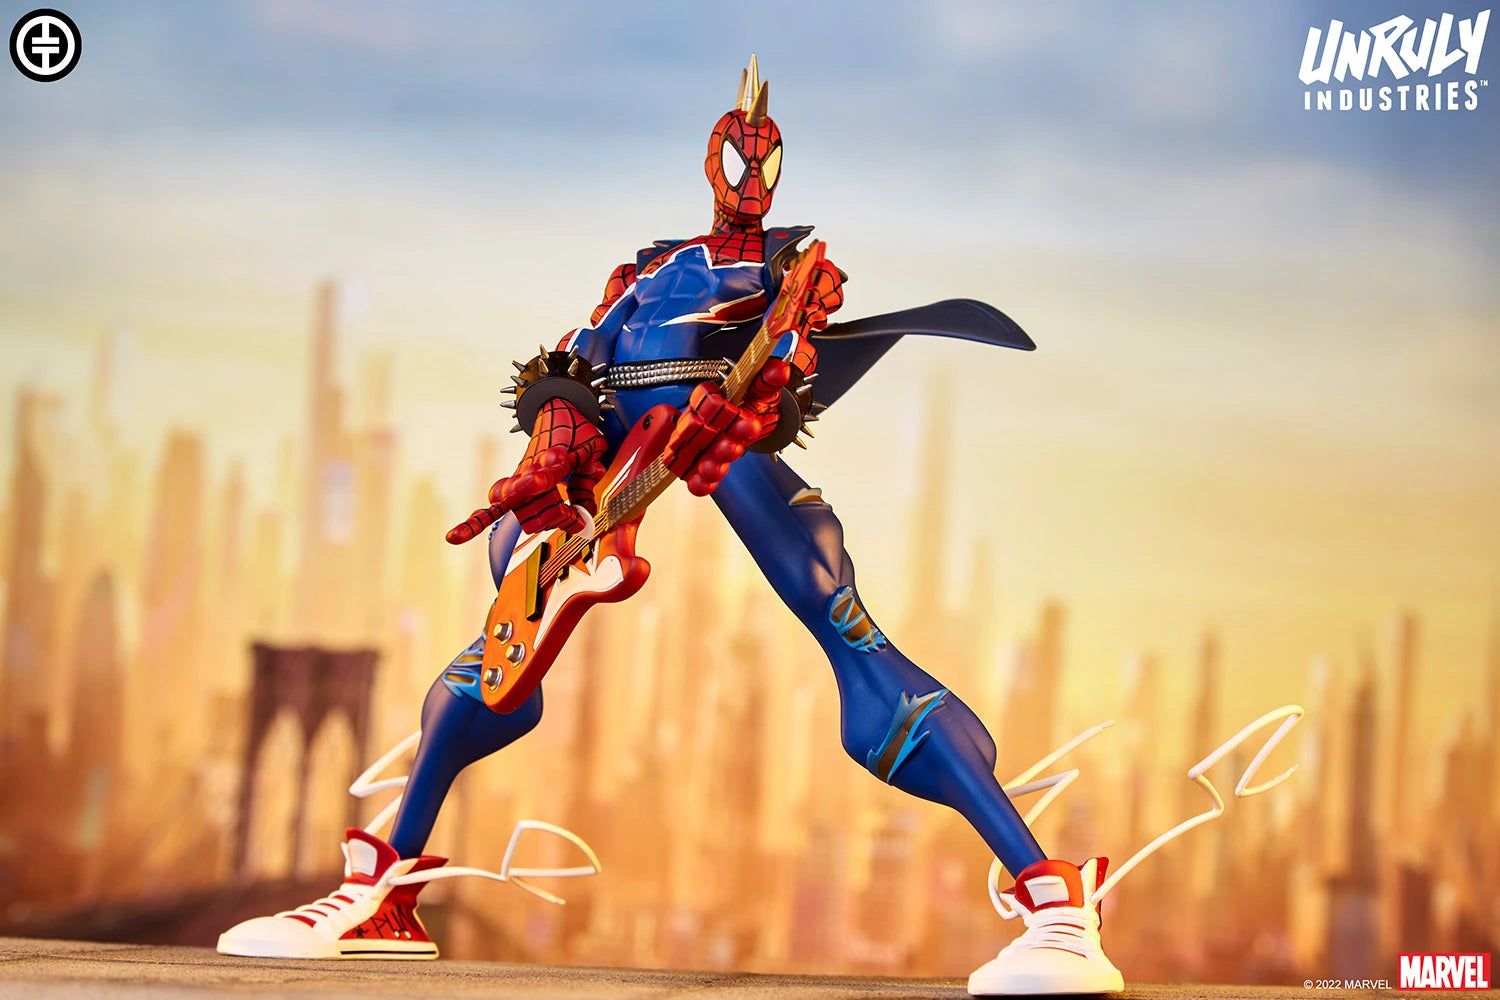 SPIDER-PUNK Designer Collectible Statue by Unruly Industries